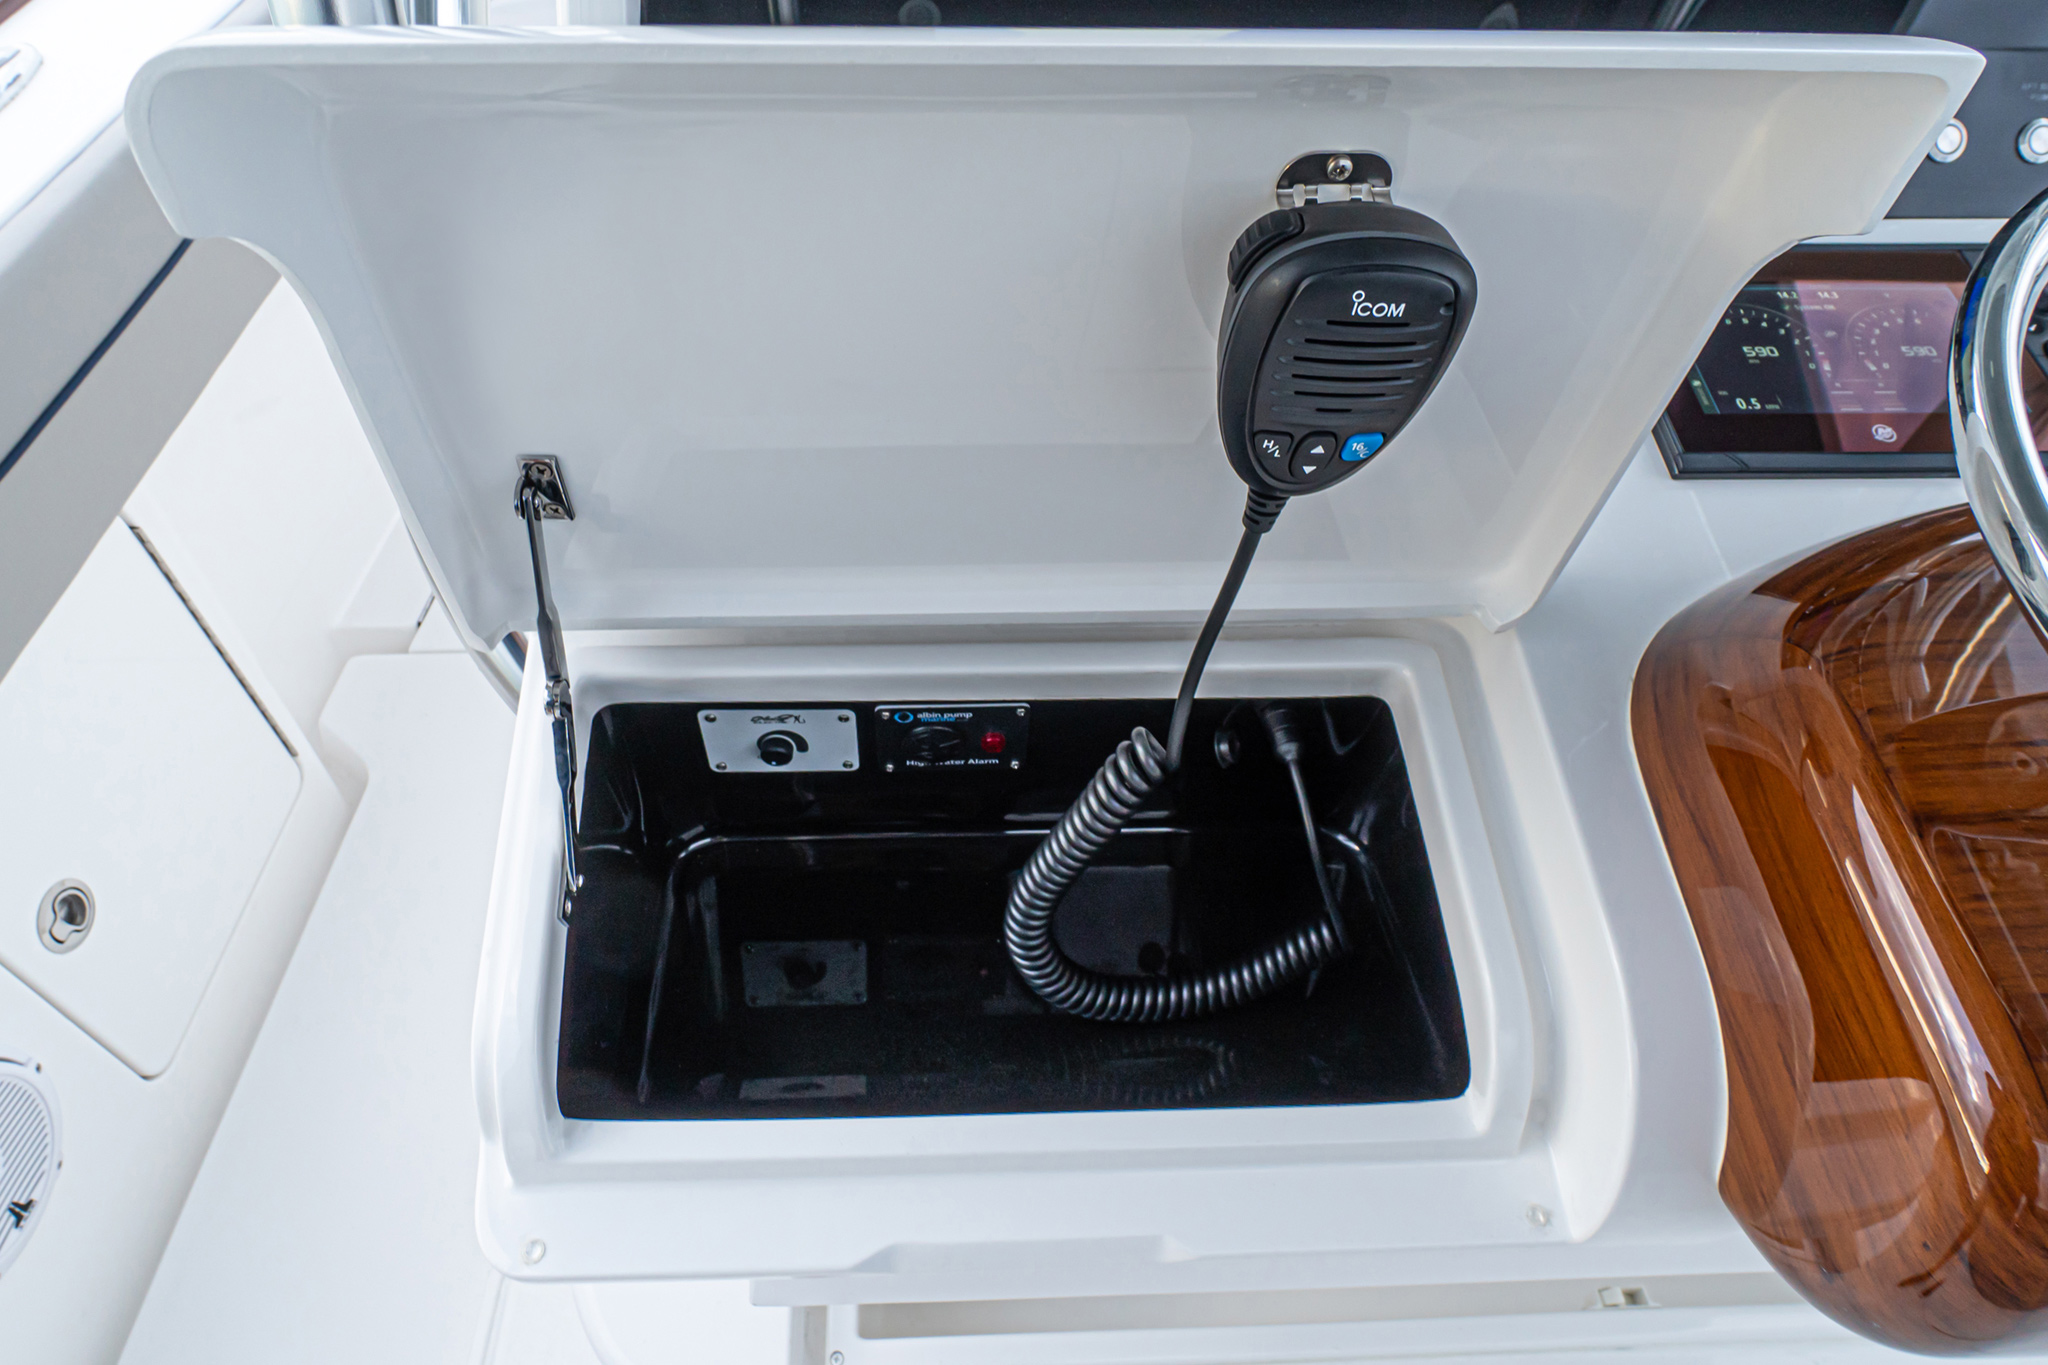 Glove box with VHF mic and holder, USB and 12V outlets, optional variable speed control knob for Hooker sea chest live well system.